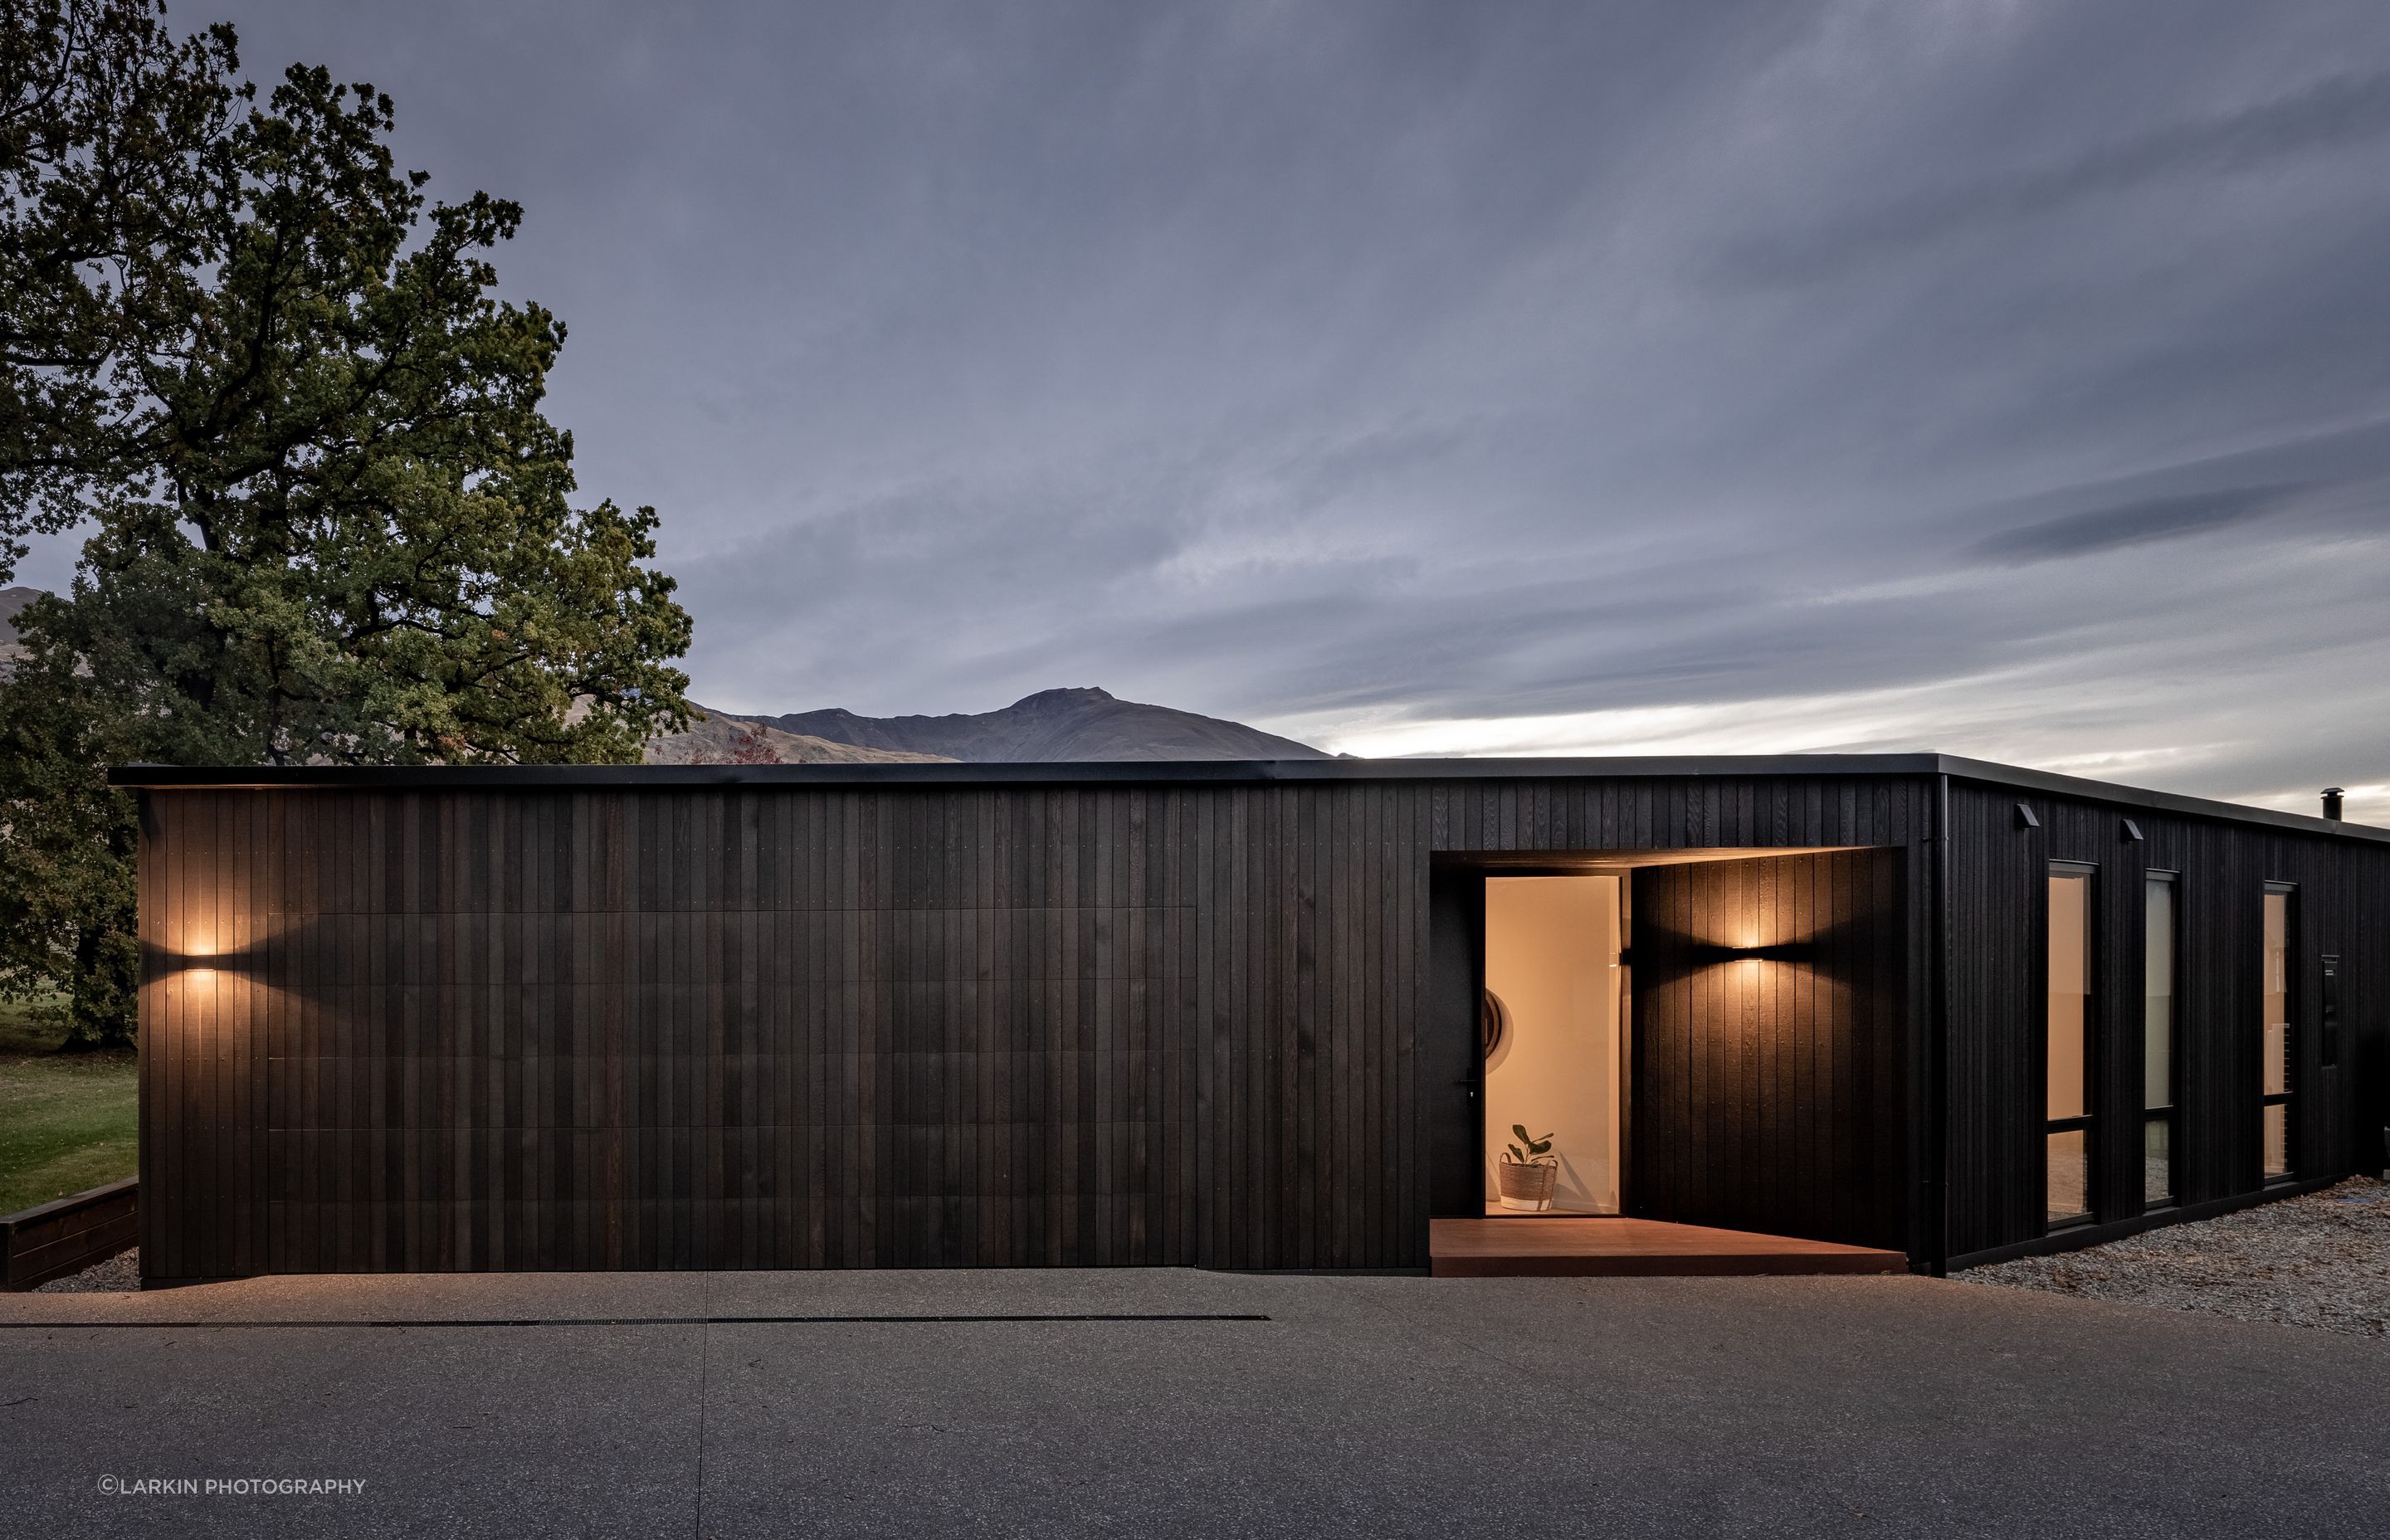 The sleek holiday home in Wanaka designed by Warwick McLaren of McLaren Architecture.Design presents a simple facade. “The built form isn’t too tricky. The house was definitely done cost-effectively but in the end this doesn’t limit it.”